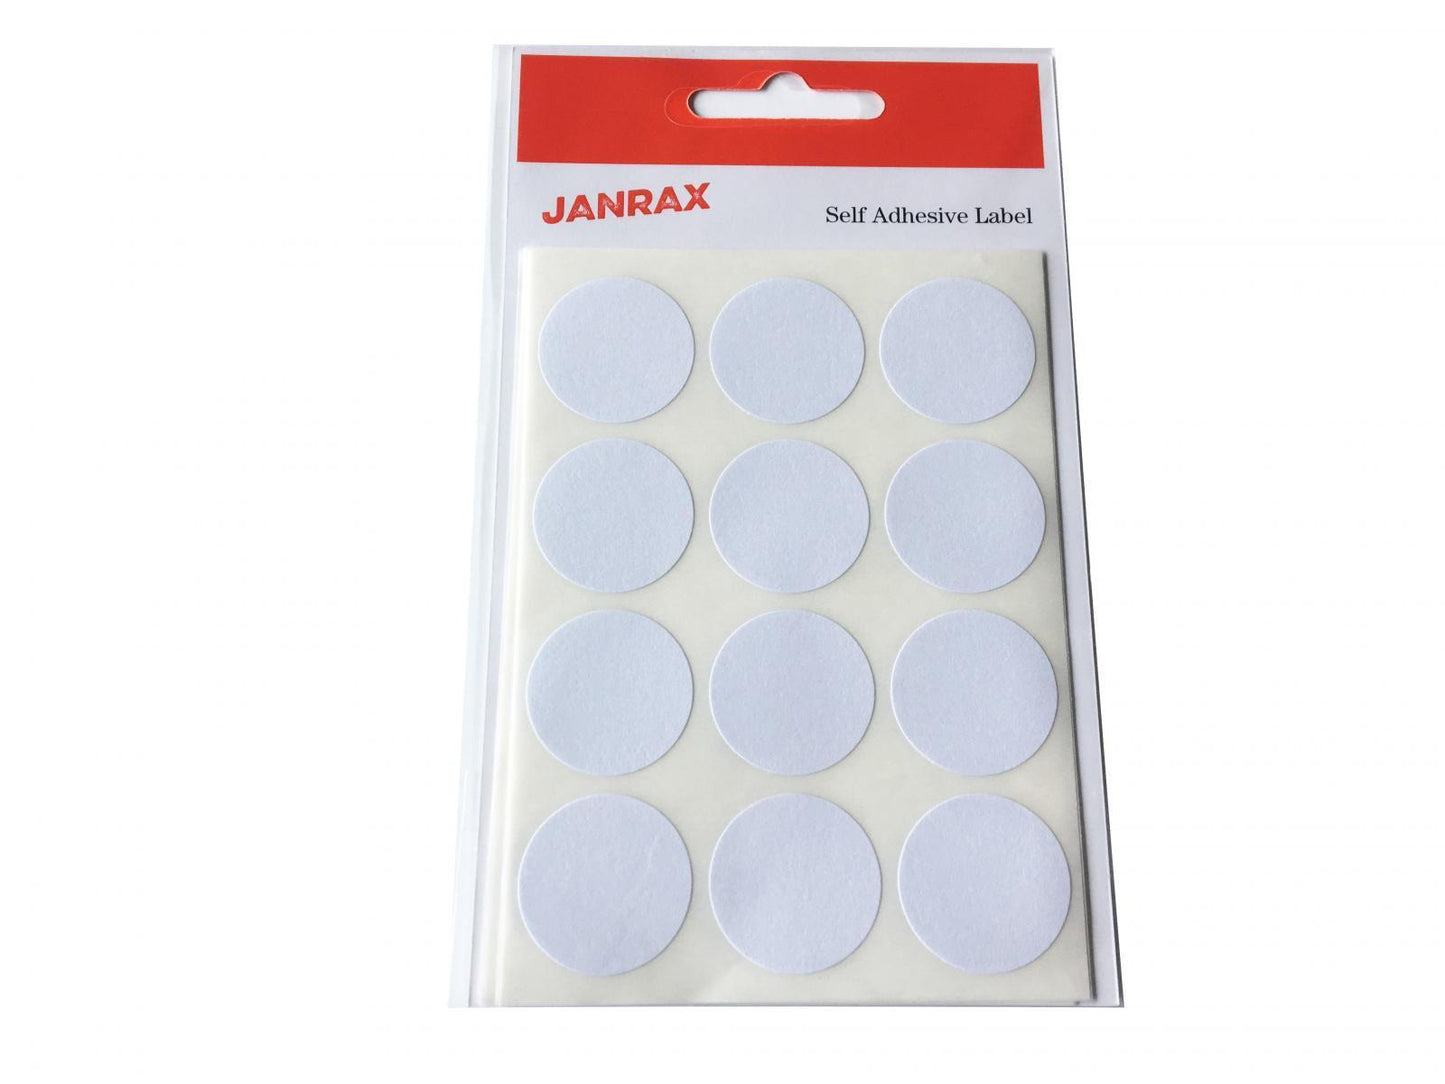 Pack of 84 White 24mm Round Labels - Stickers